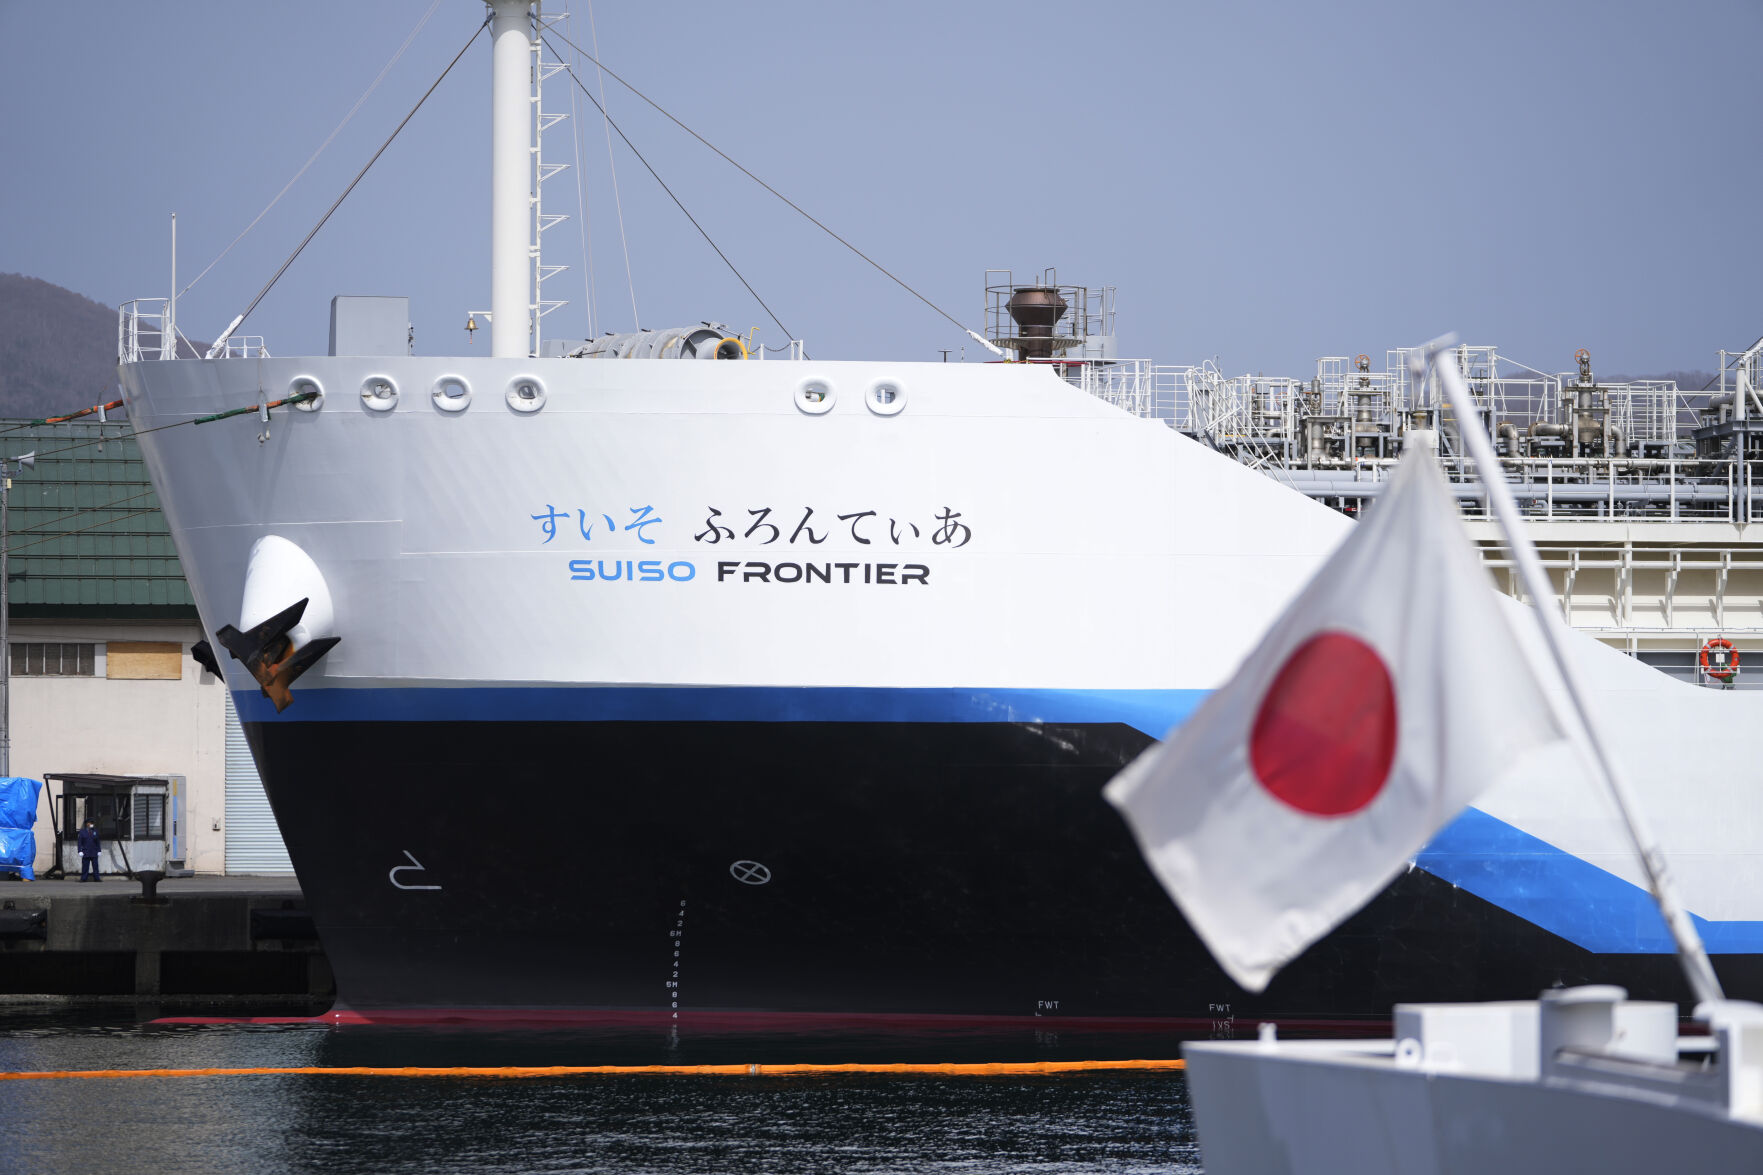 <p>The Suiso Frontier, a liquefied hydrogen carrier, is berthed in Otaru, northern Japan, on April 14, 2023. Japan’s government on Tuesday, June 6, 2023, adopted a revision to the country’s plans to use more hydrogen as fuel as part of the effort to reduce carbon emissions. (AP Photo/Hiro Komae, File)</p>   PHOTO CREDIT: Hiro Komae 